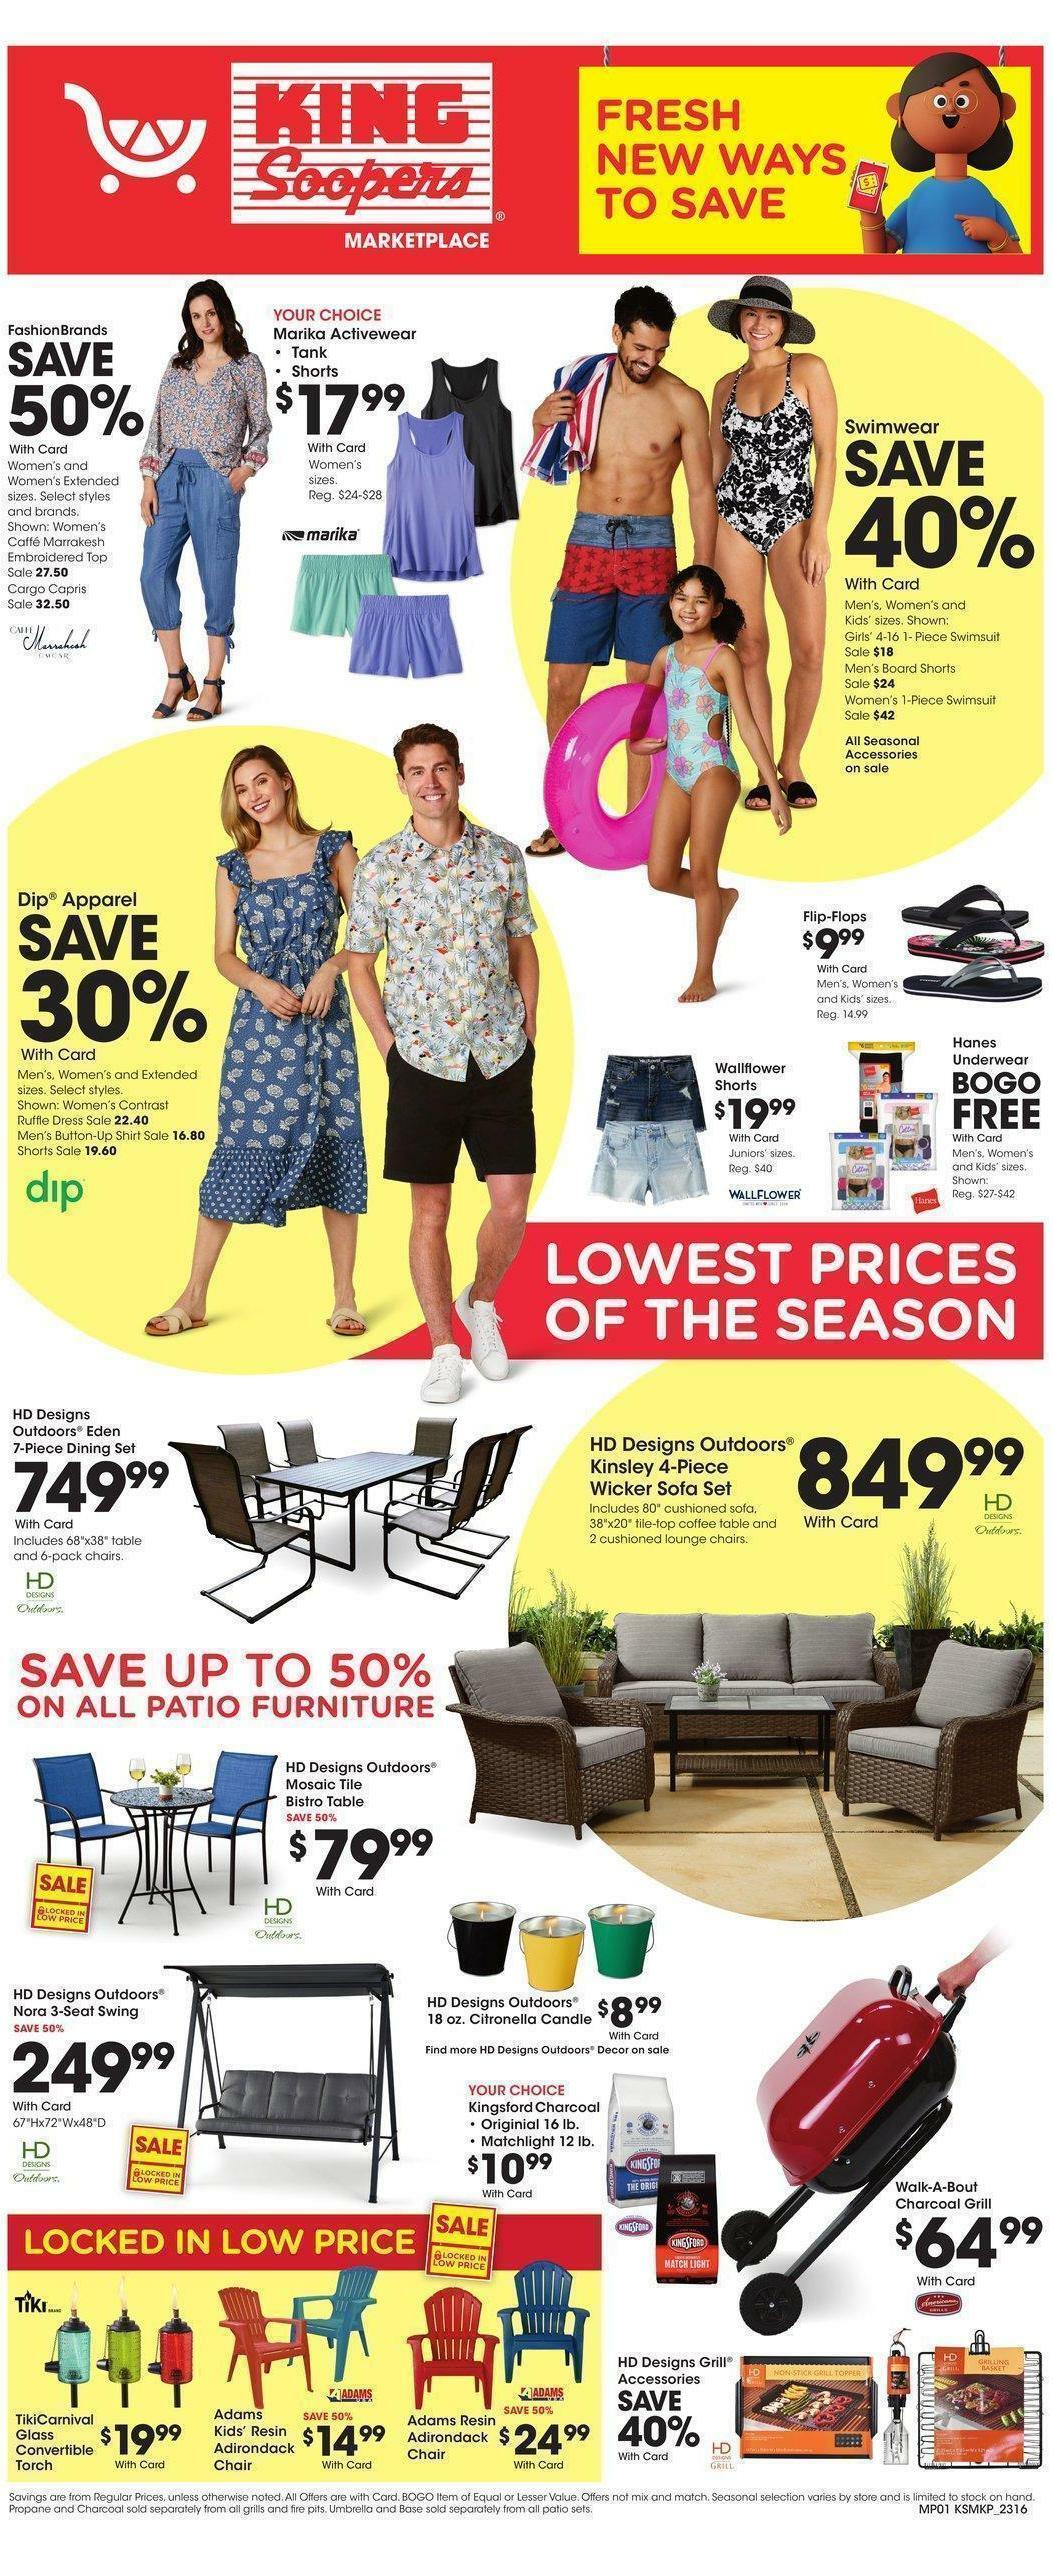 King Soopers Fresh New Ways to Save Weekly Ad from May 17